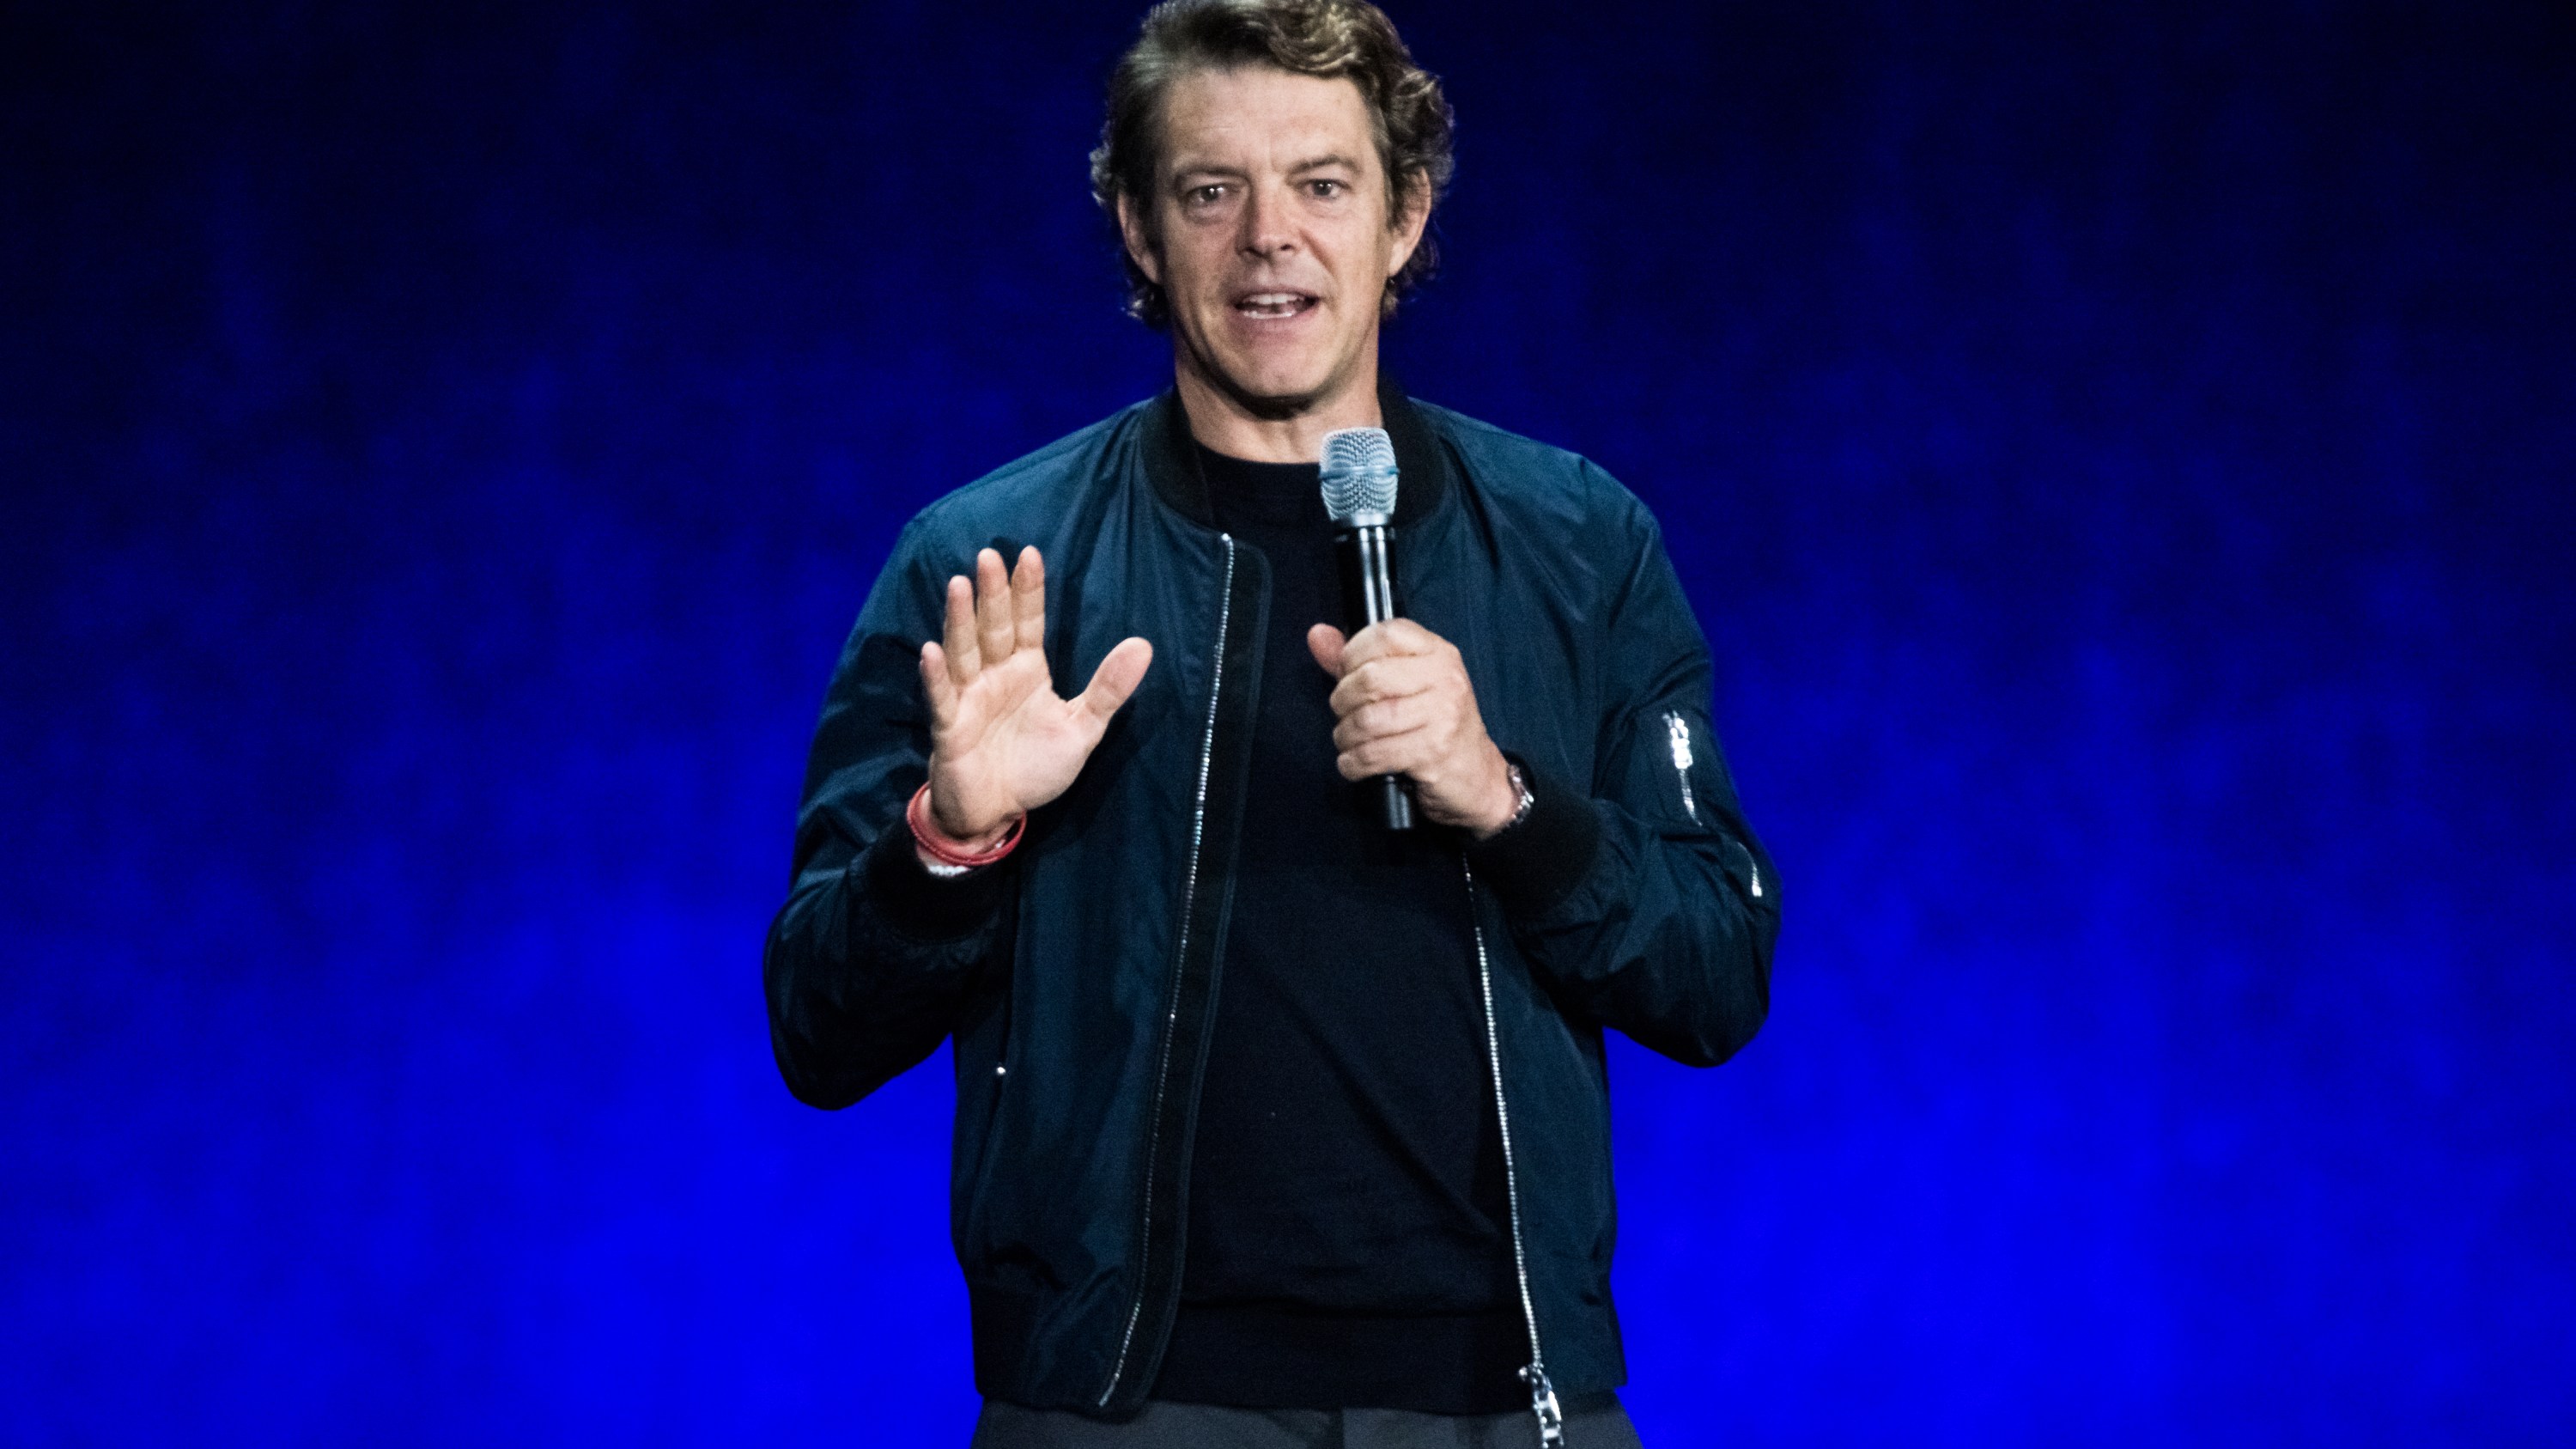 LAS VEGAS, NEVADA - APRIL 26: Blumhouse Productions CEO and producer Jason Blum speaks during Universal Pictures and Blumhouse Productions screening of the movie "The Black Phone" during CinemaCon 2022 at Caesars Palace on April 26, 2022 in Las Vegas, Nevada. (Photo by Greg Doherty/Getty Images)